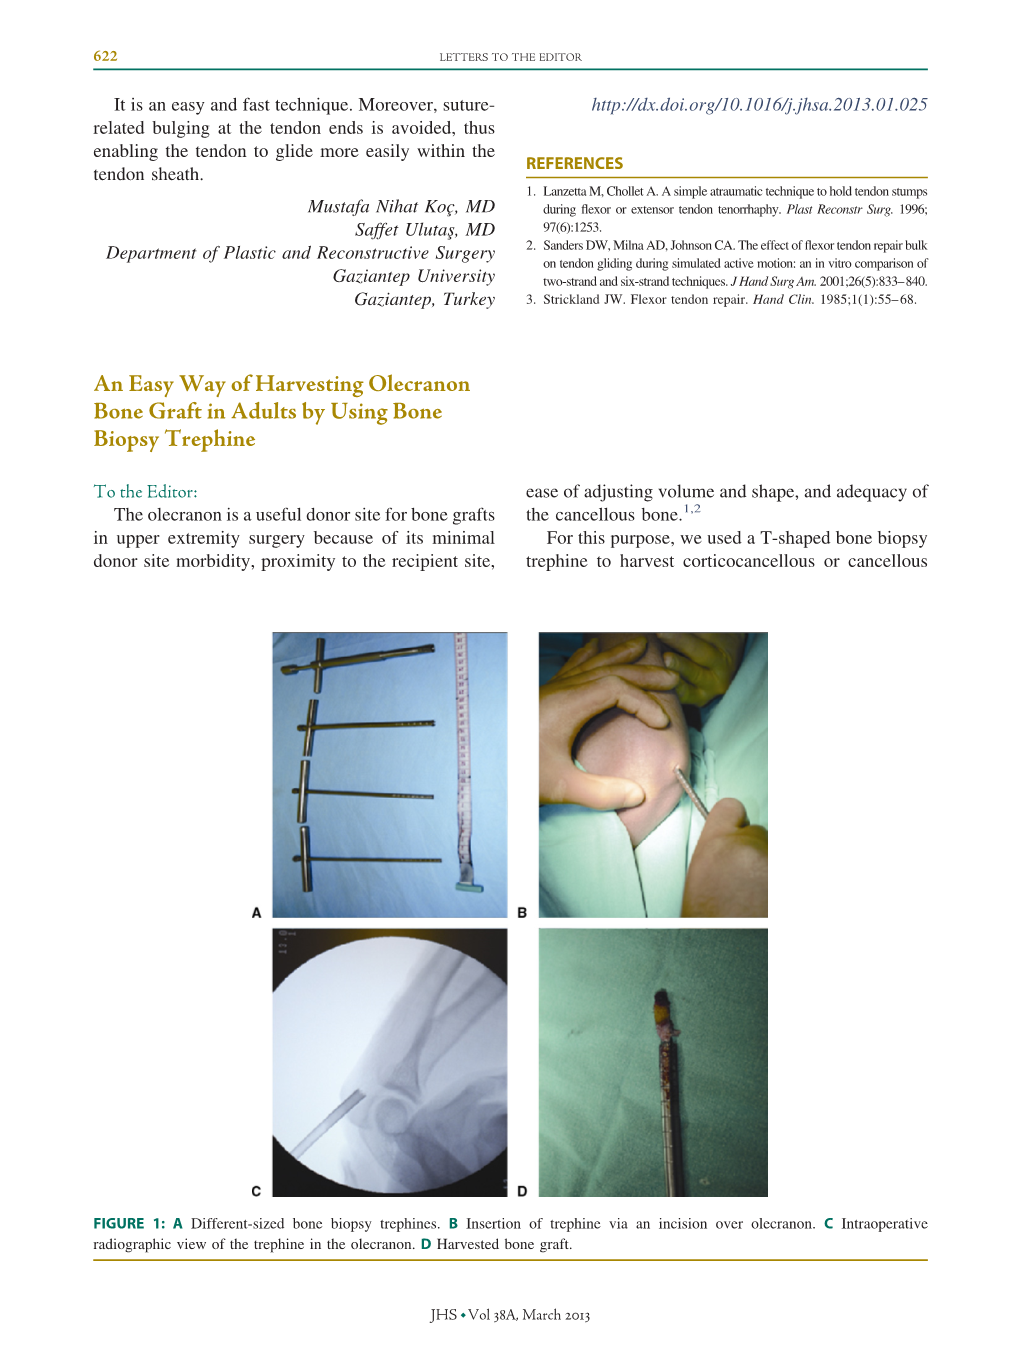 An Easy Way of Harvesting Olecranon Bone Graft in Adults by Using Bone Biopsy Trephine